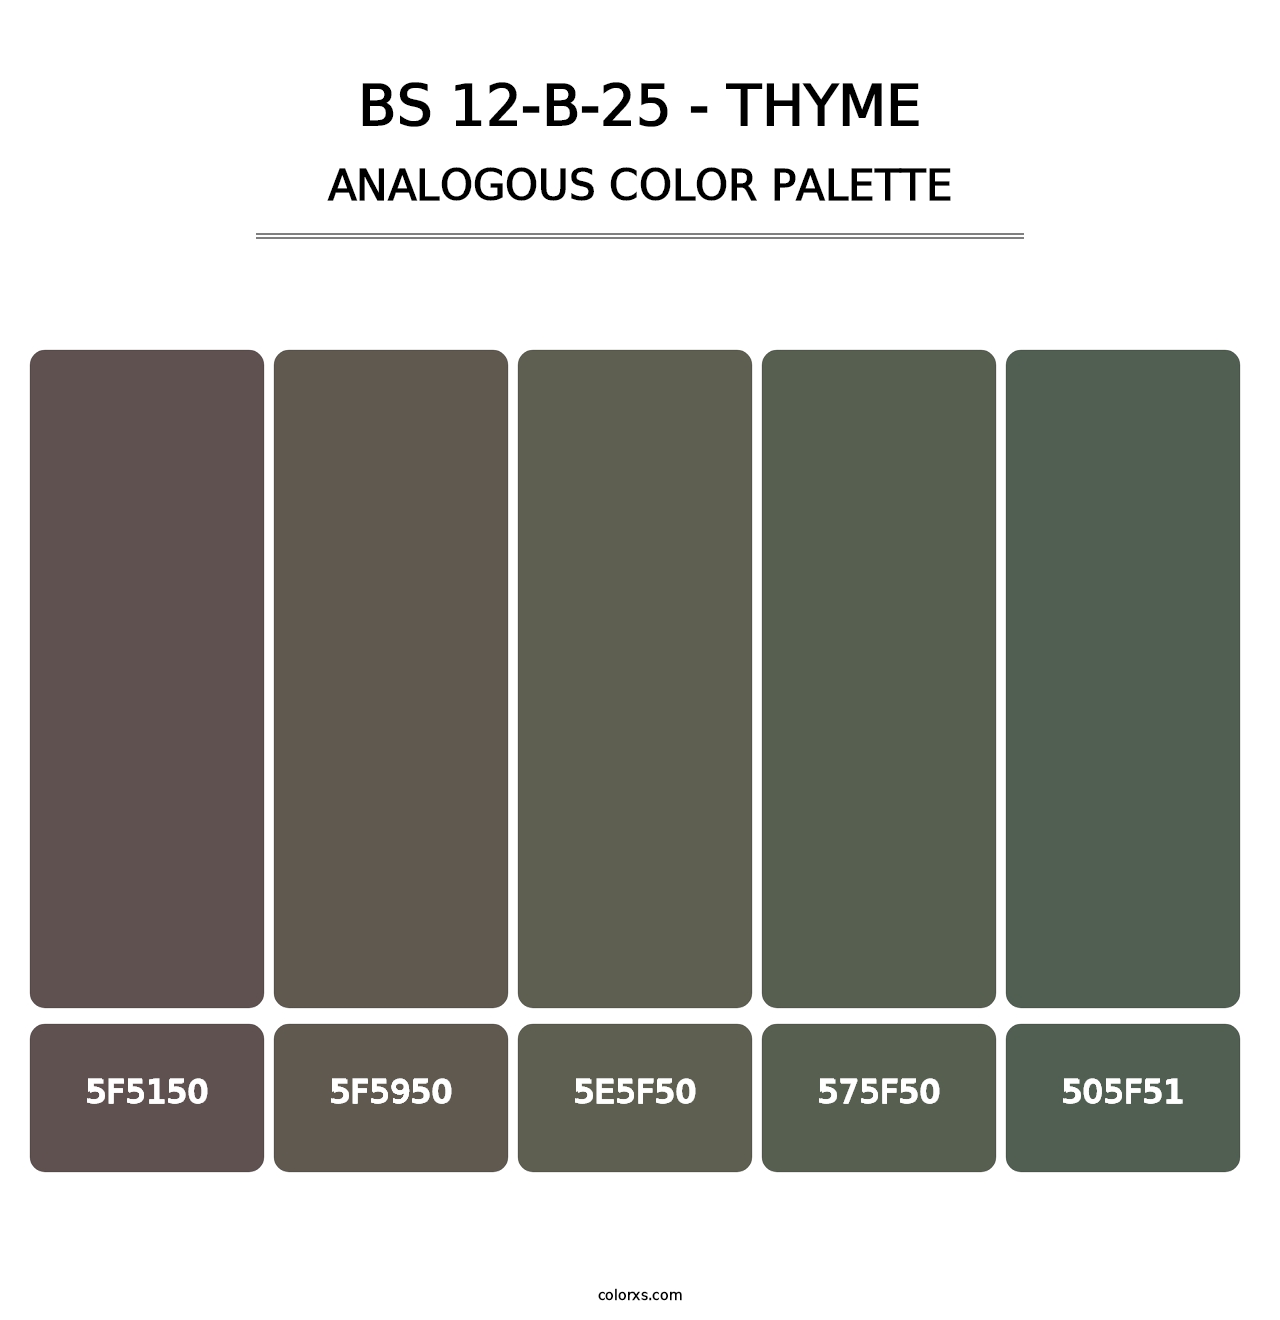 BS 12-B-25 - Thyme - Analogous Color Palette